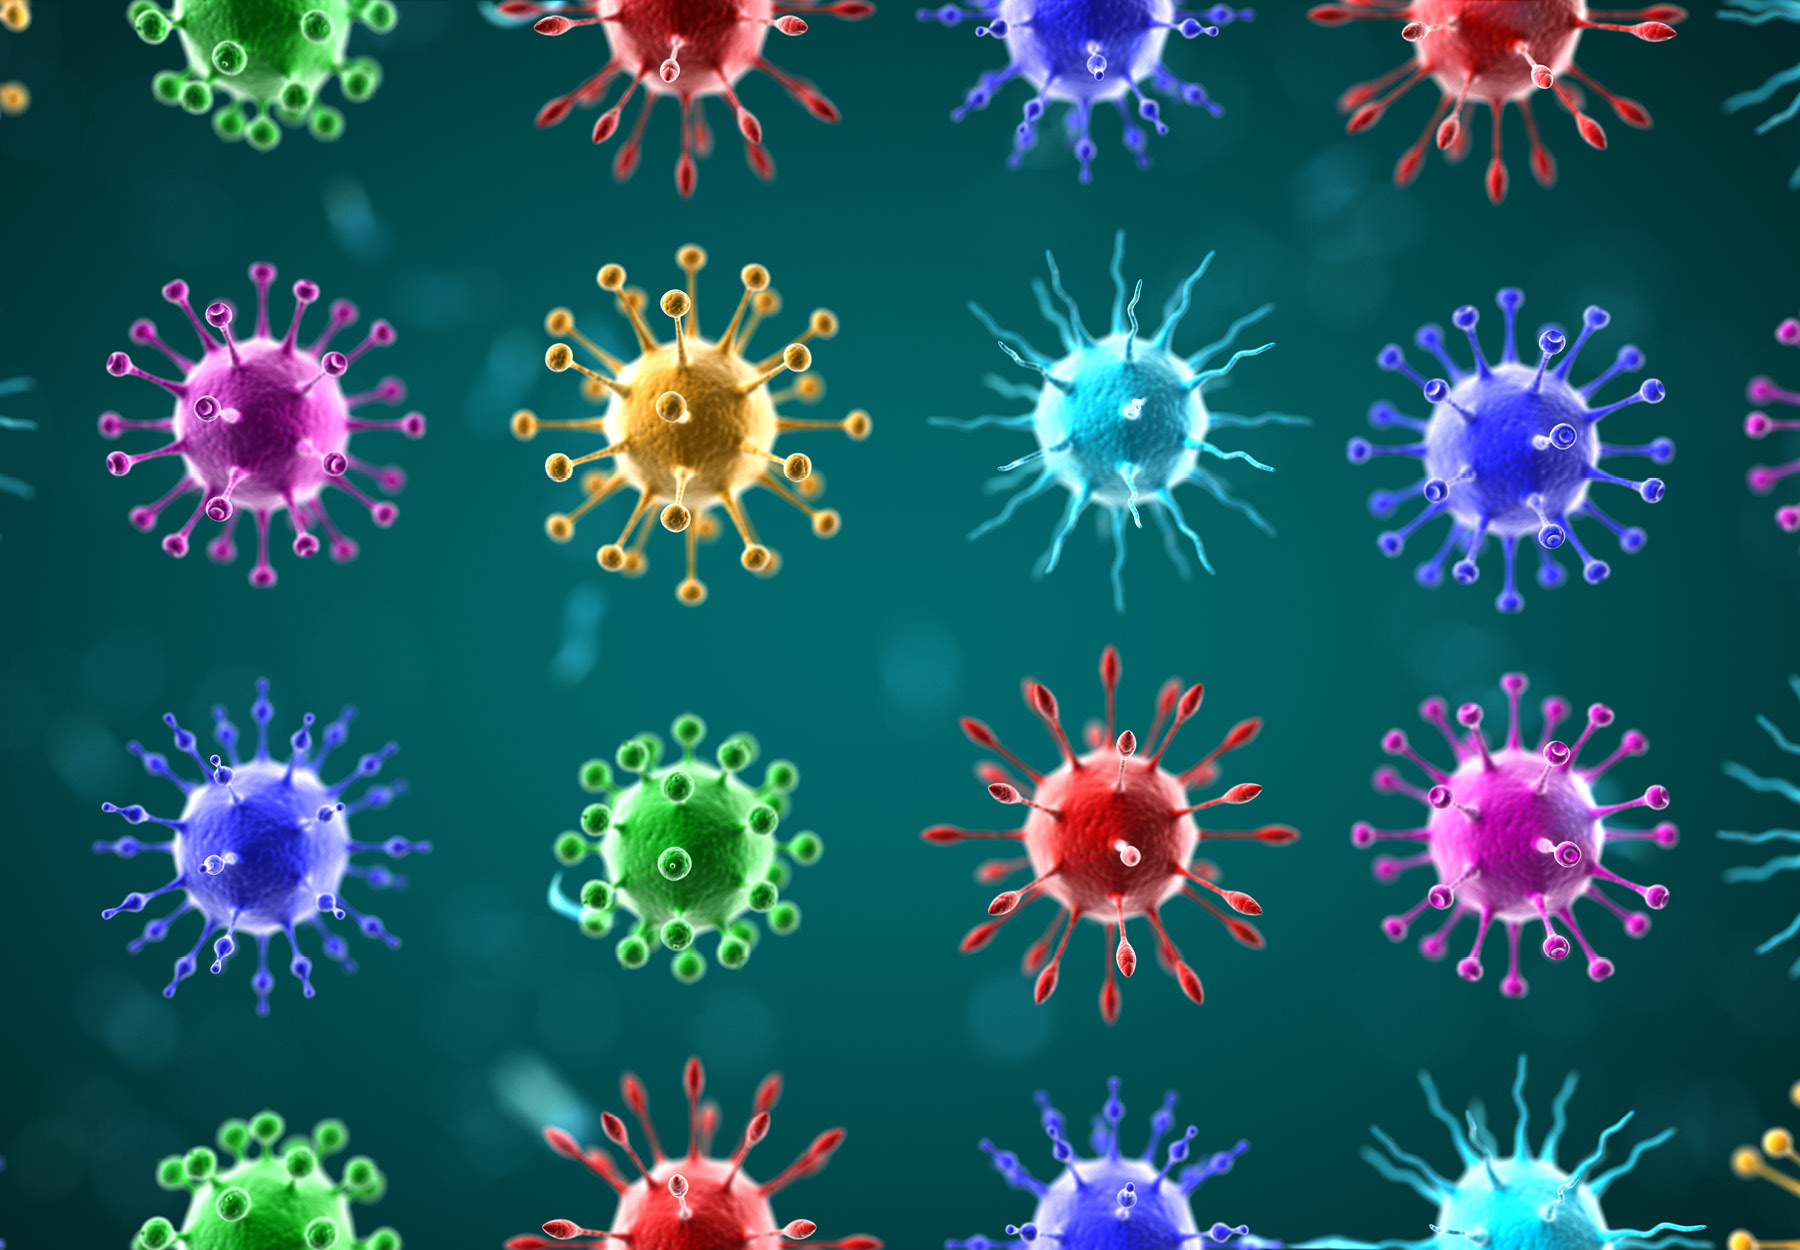 An illustration of many different colored viruses to symbolize the identification of variants